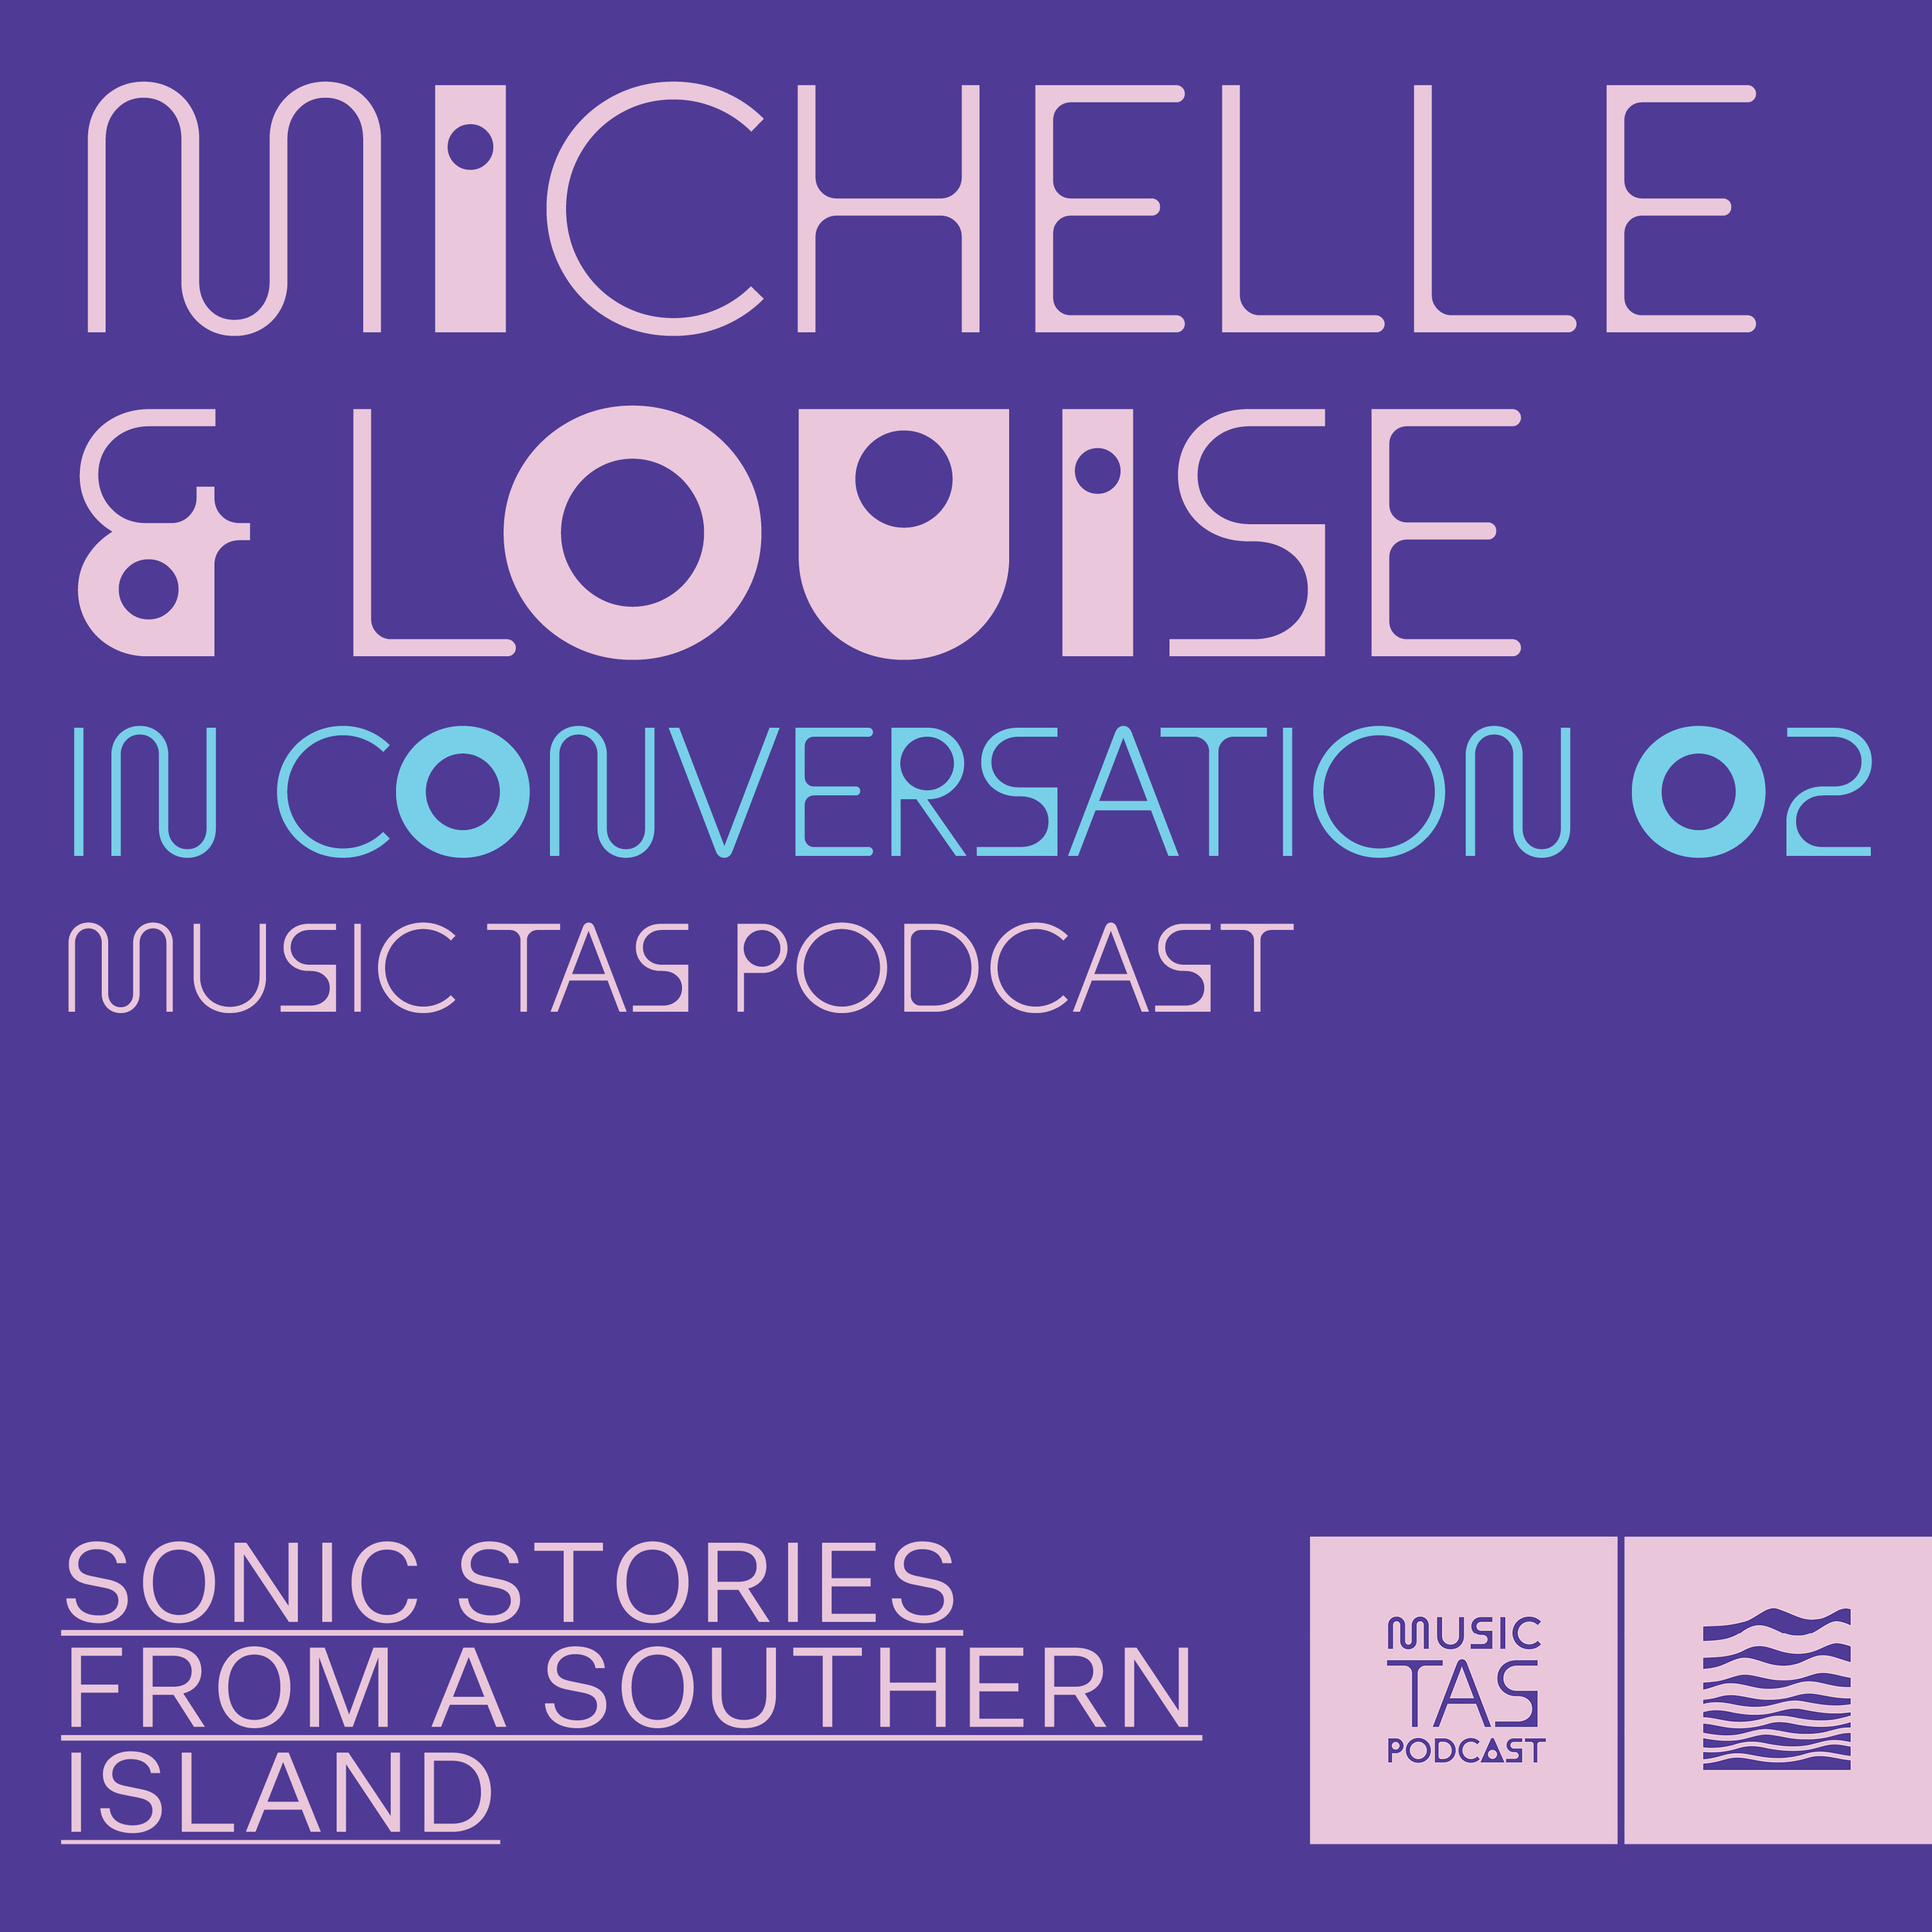 Michelle & Louise In Conversation 02, Music Tas Podcast